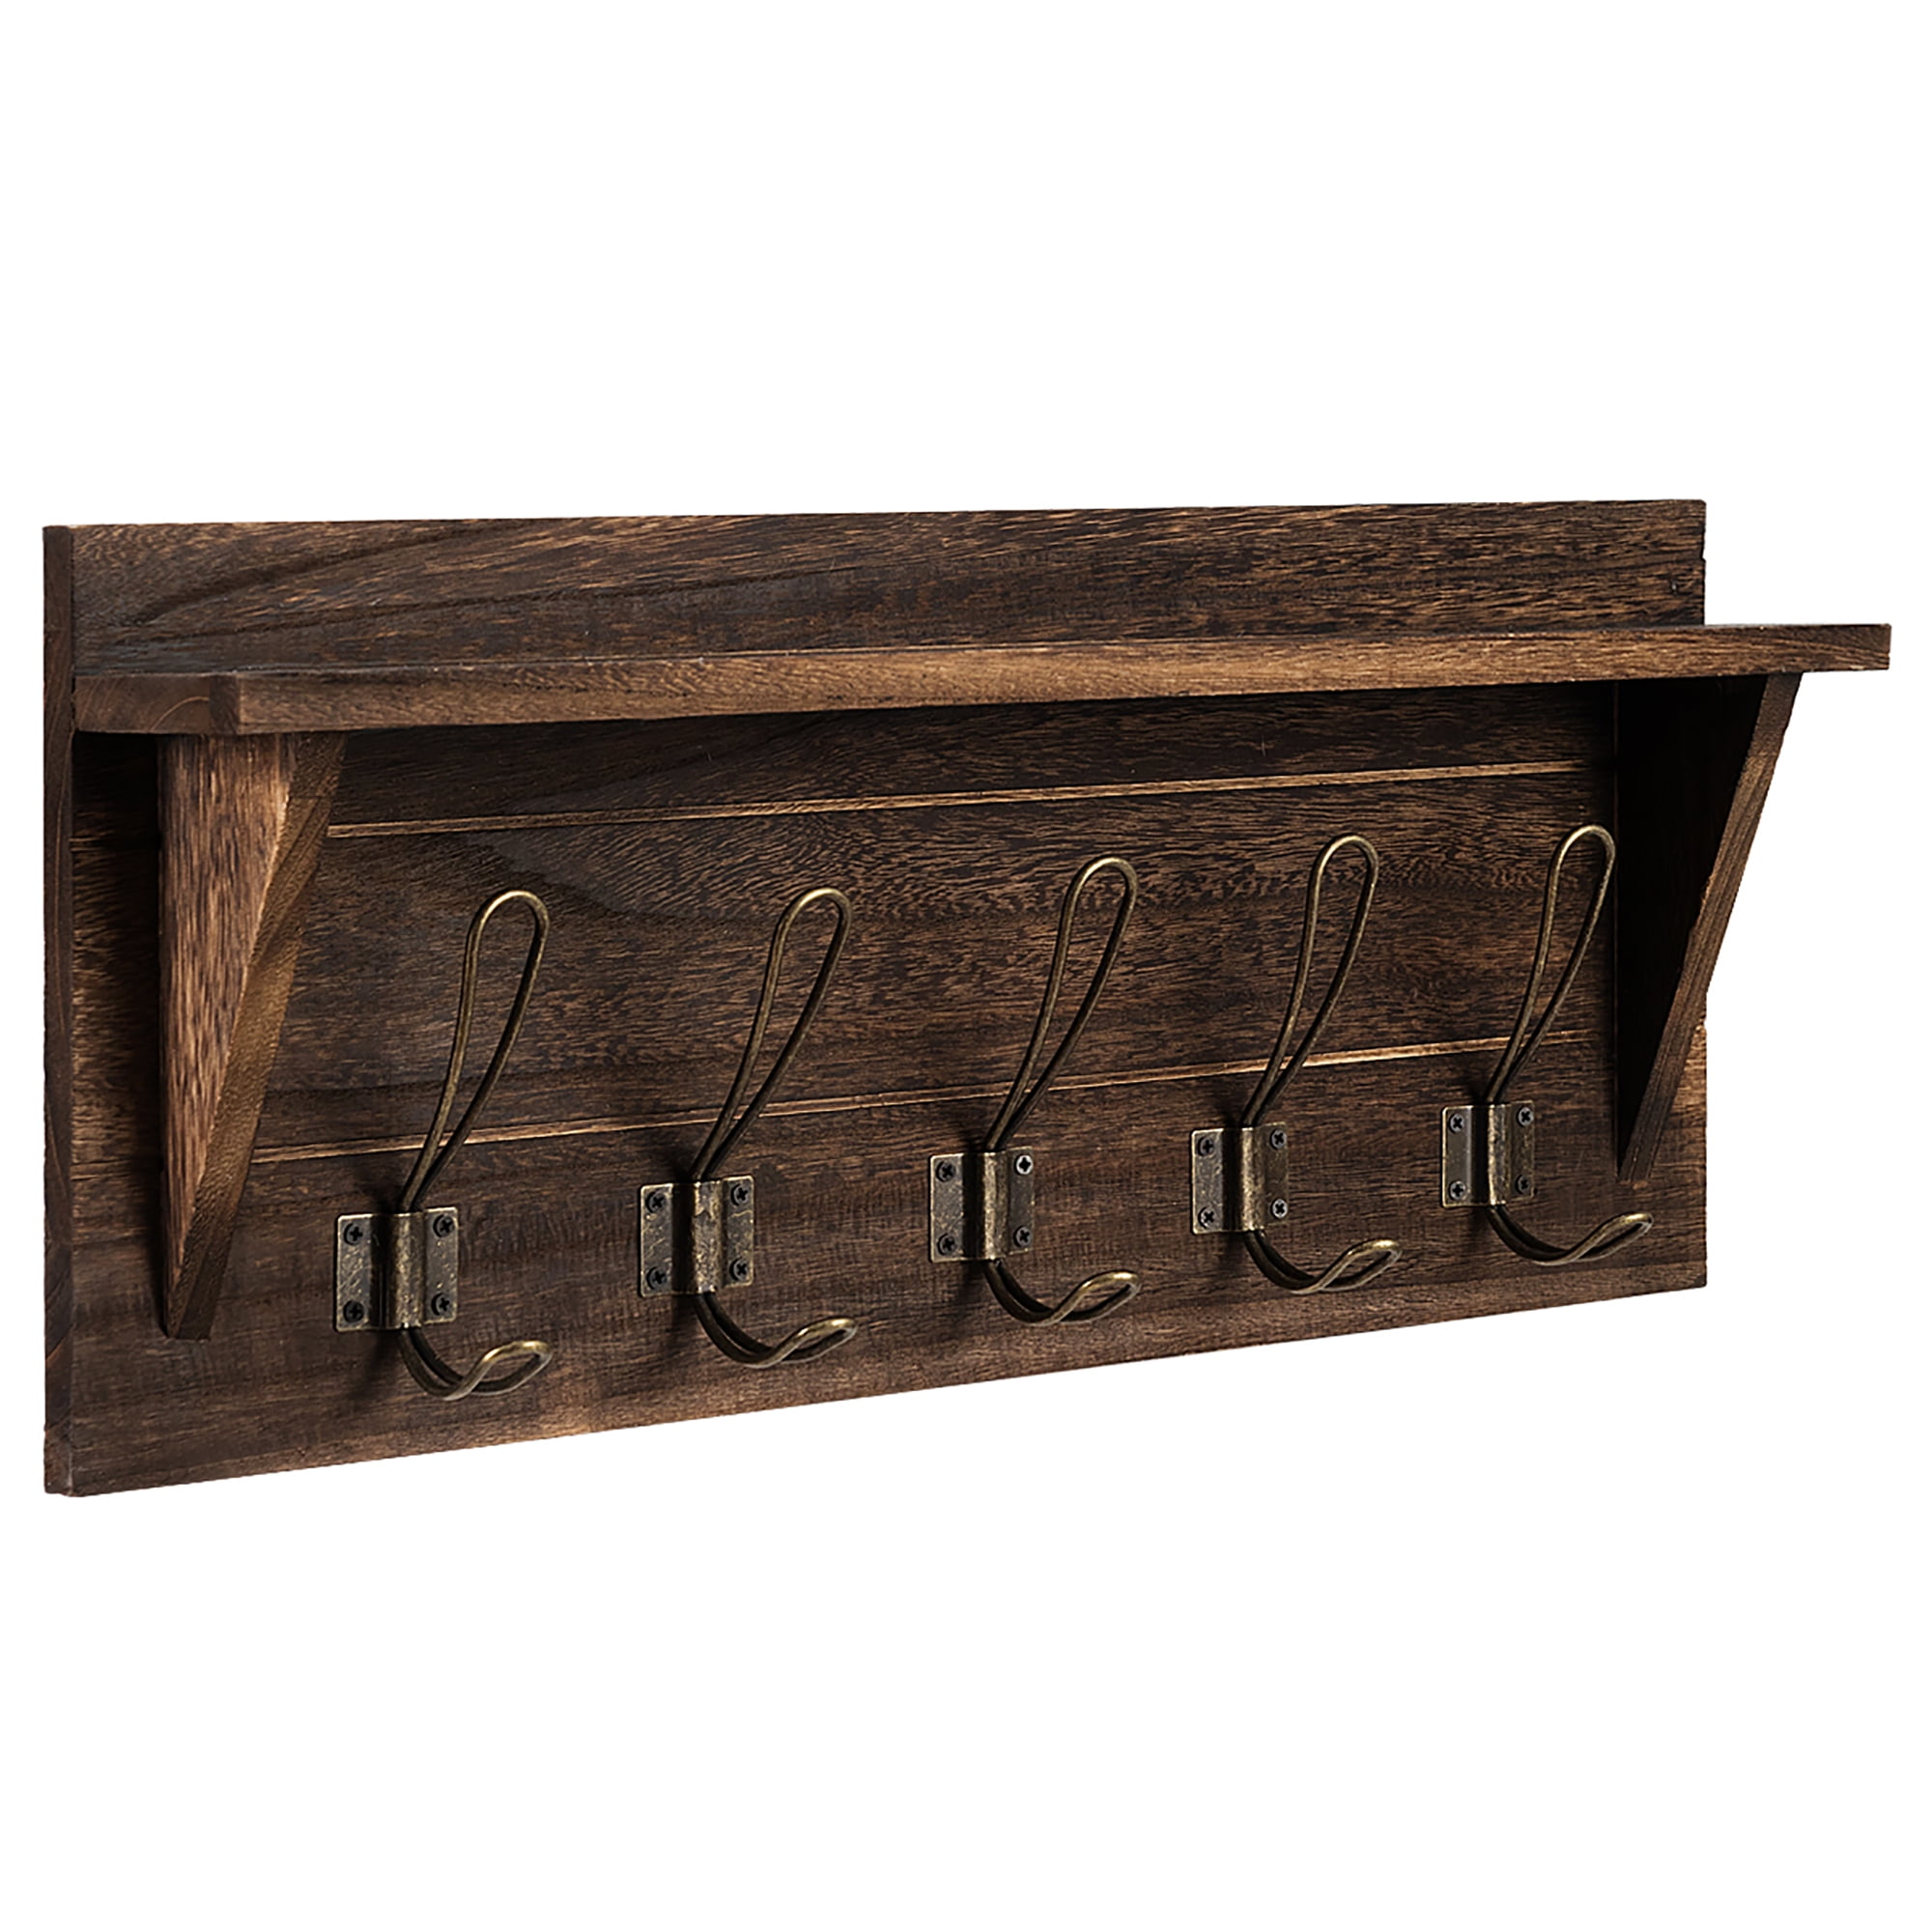 Details about   Rustic Wooden Wall-Mounted Coat Rack Entryway Hanging Shelf w/5 Dual Hooks Brown 